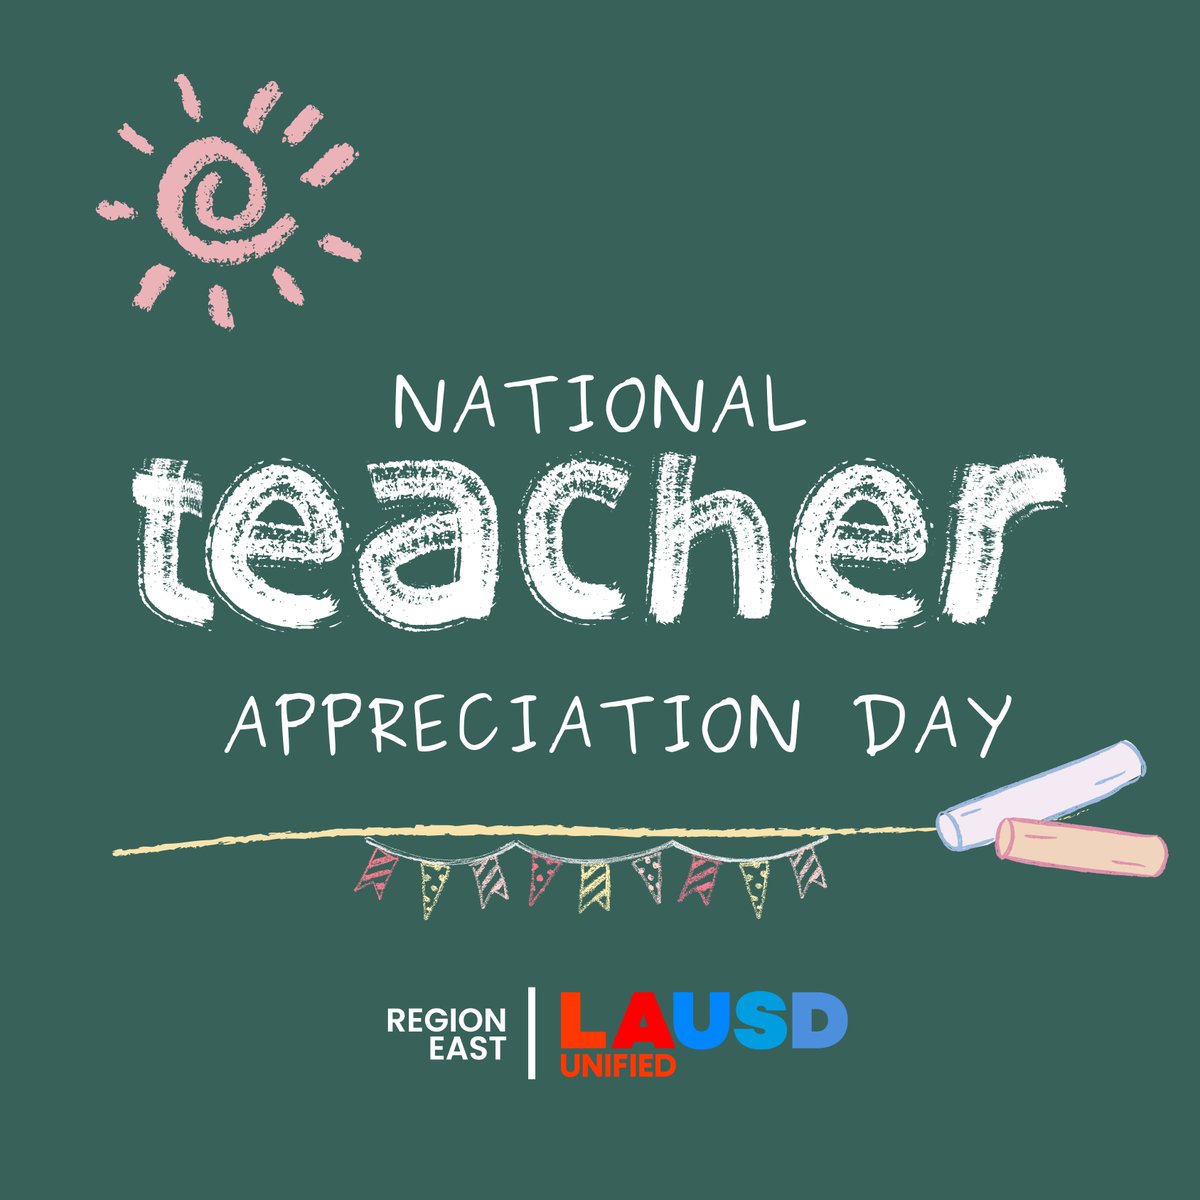 On #NationalTeacherAppreciationDay, we celebrate the incredible dedication, passion and hard work of our Region East teachers and substitute teachers! Thank you for shaping the minds and inspiring the dreams of our students! 🍎#TeacherAppreciationDay #TeacherAppreciationWeek